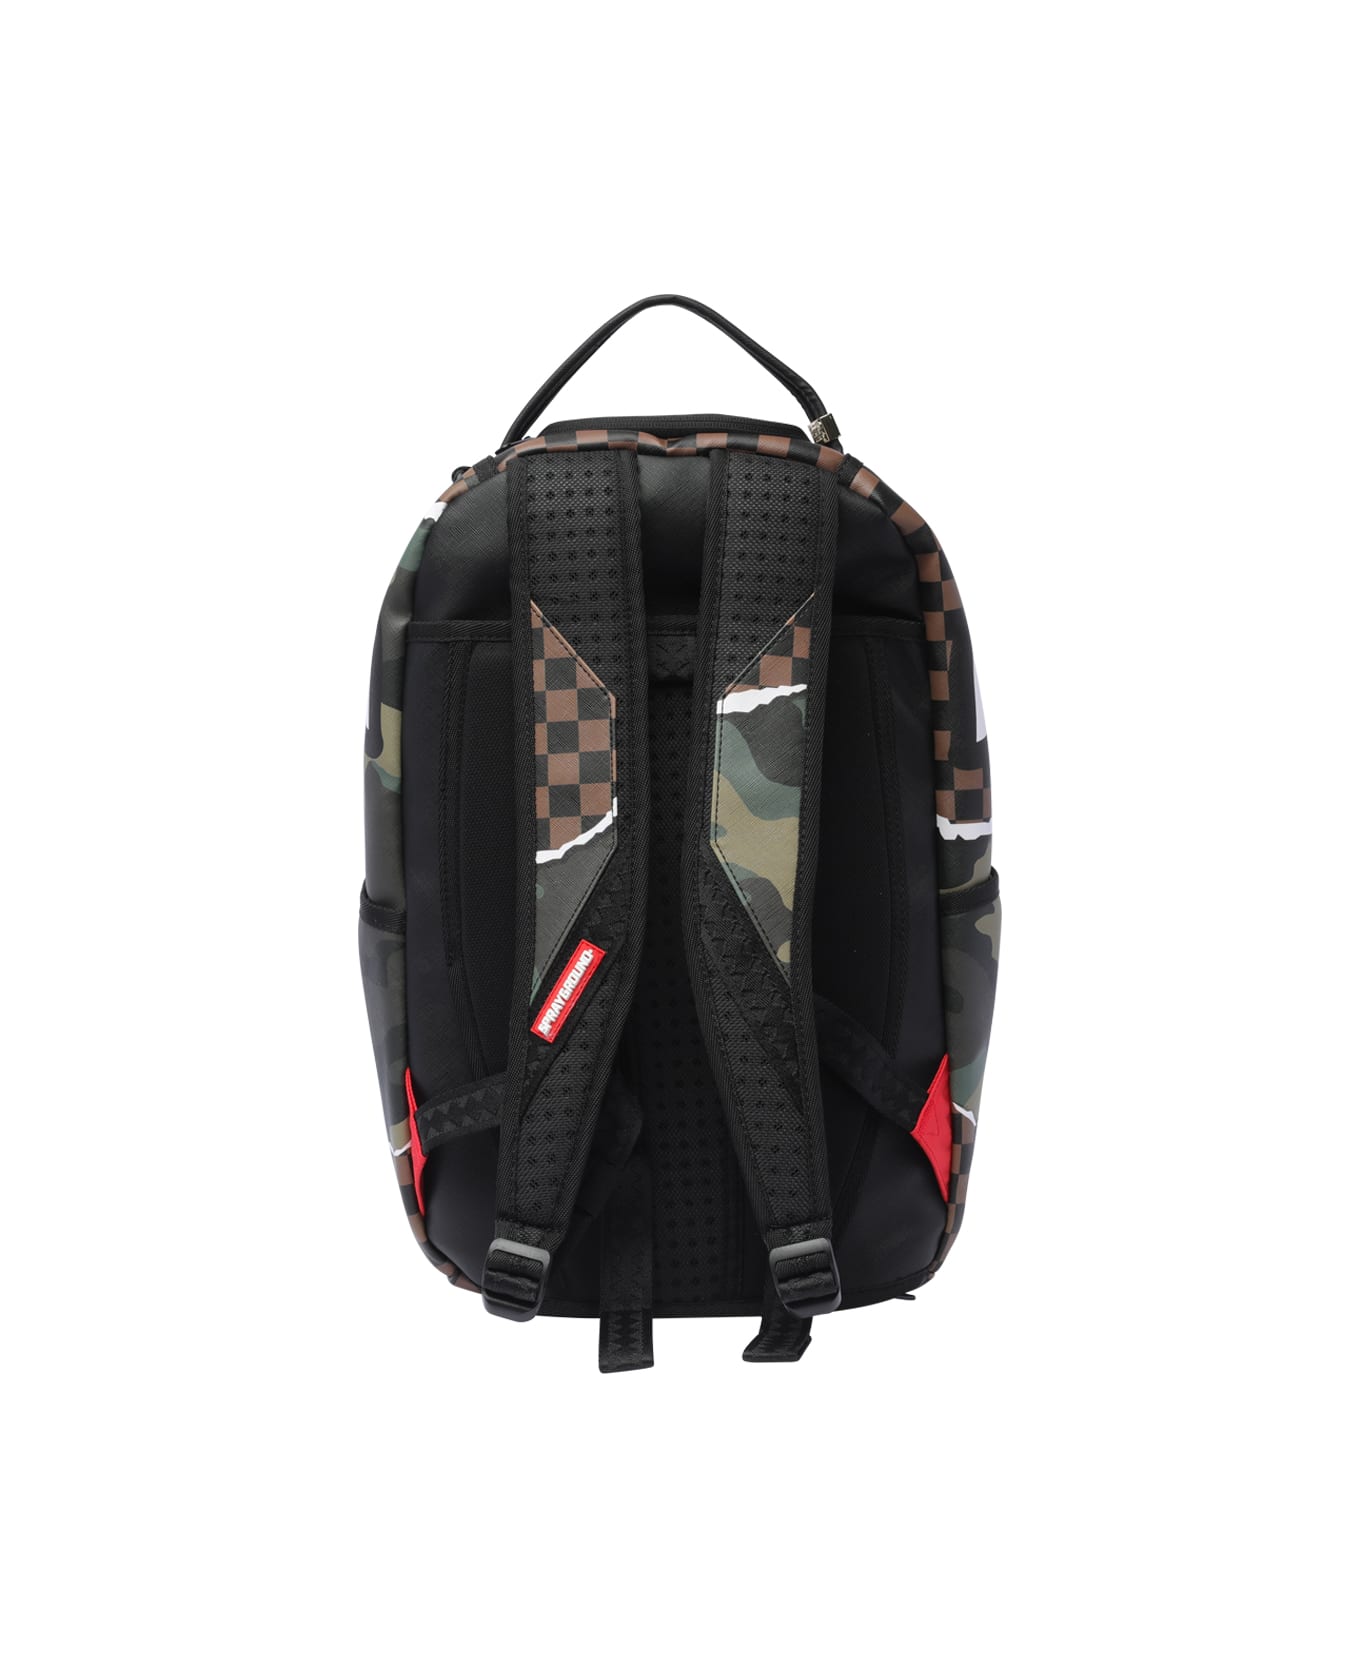 Sprayground Tear It Up Camo Backpack - Brown